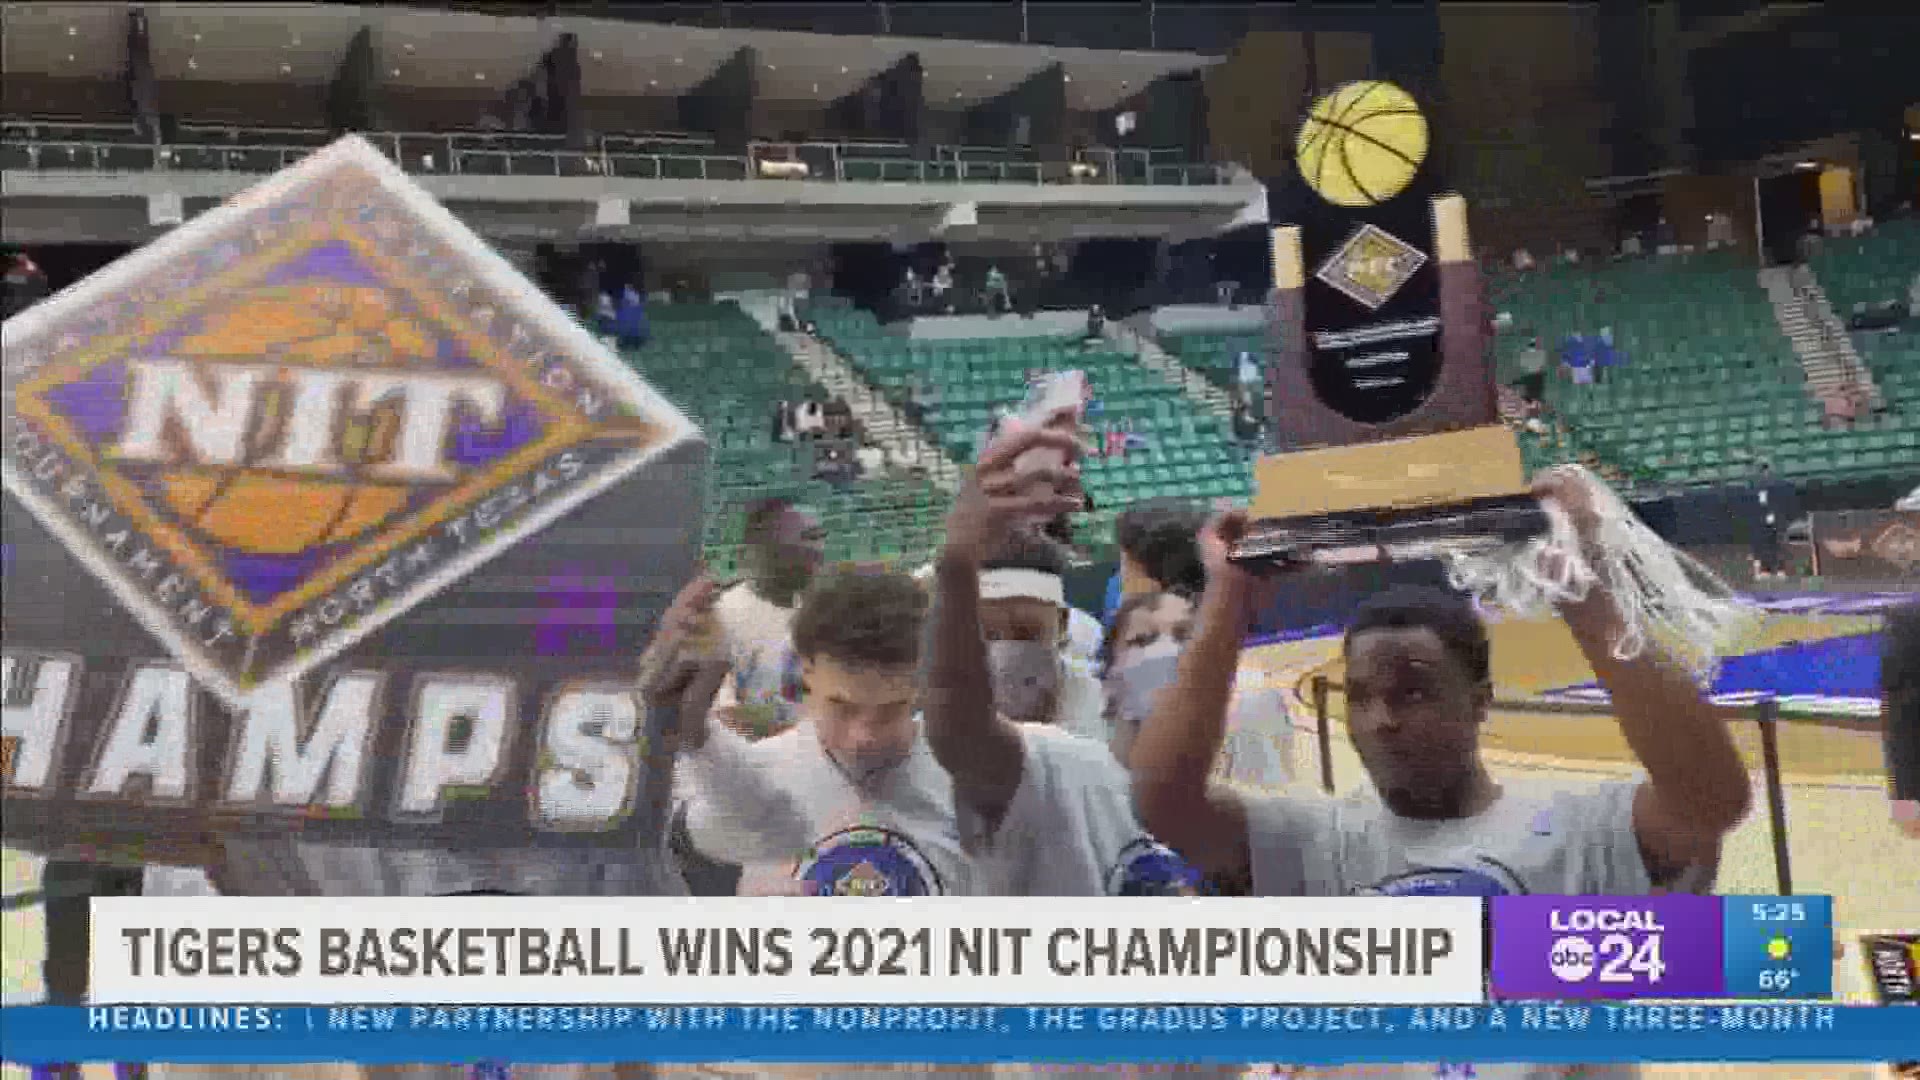 The University of Memphis men’s basketball team earns NIT championship and the admiration of Tigers fans everywhere.